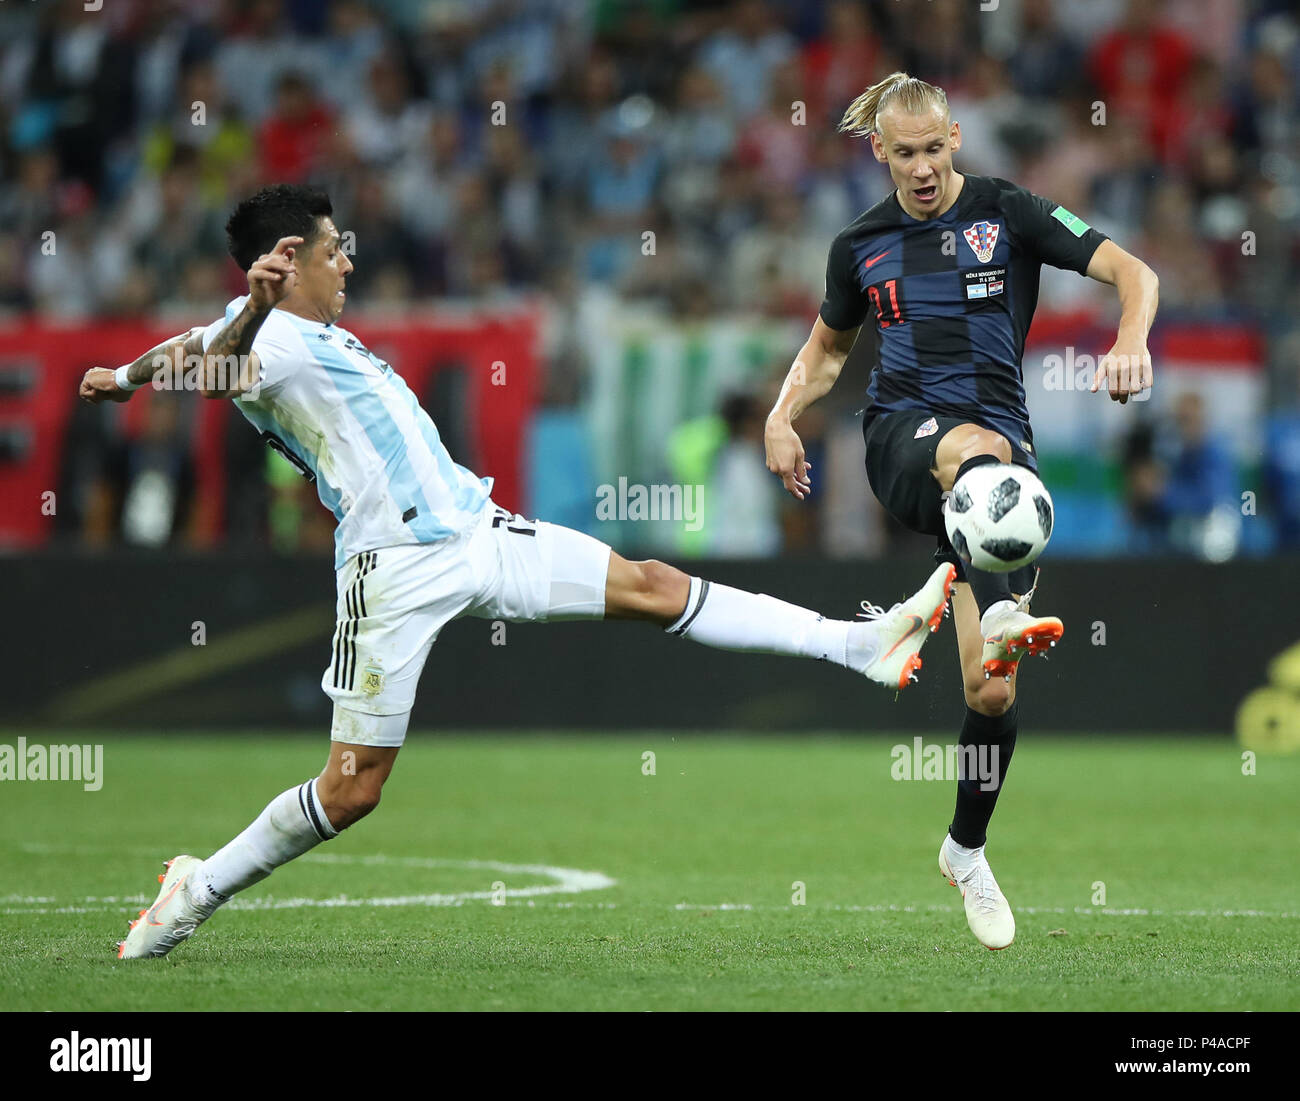 Nizhny Novgorod, Russia. 21st June, 2018. Enzo Perez (L) of Argentina vies with Domagoj Vida of Croatia during the 2018 FIFA World Cup Group D match between Argentina and Croatia in Nizhny Novgorod, Russia, June 21, 2018. Credit: Wu Zhuang/Xinhua/Alamy Live News Stock Photo